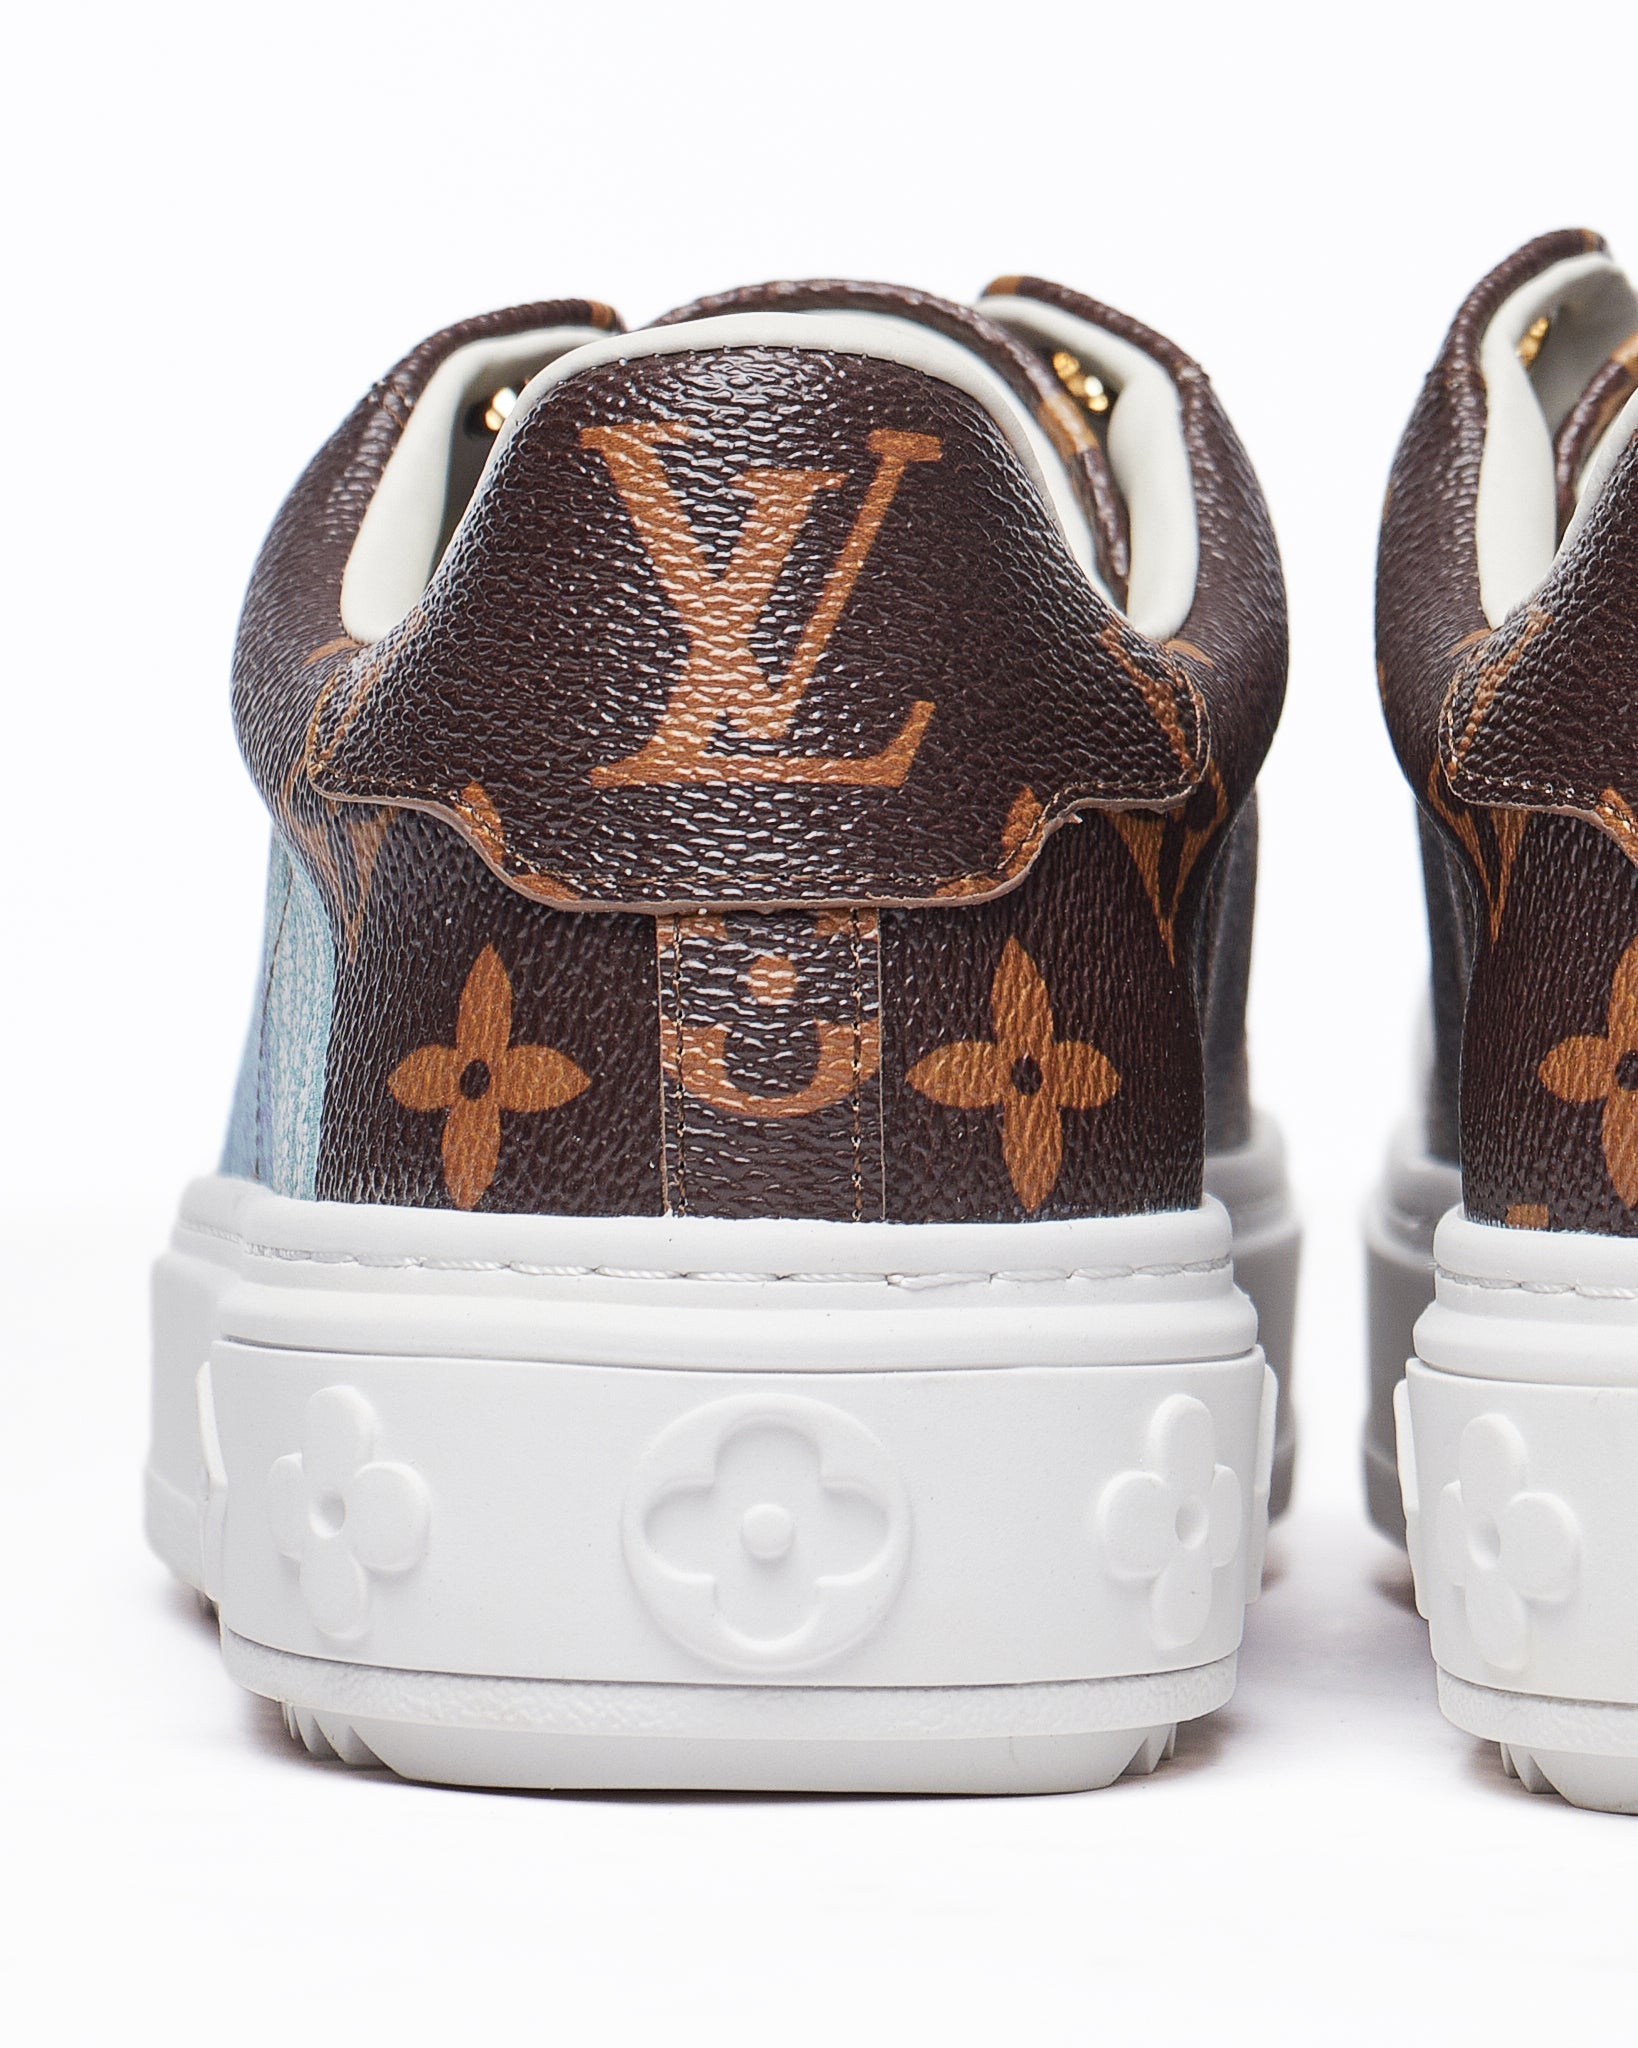 monogram louis vuitton sneakers outfit